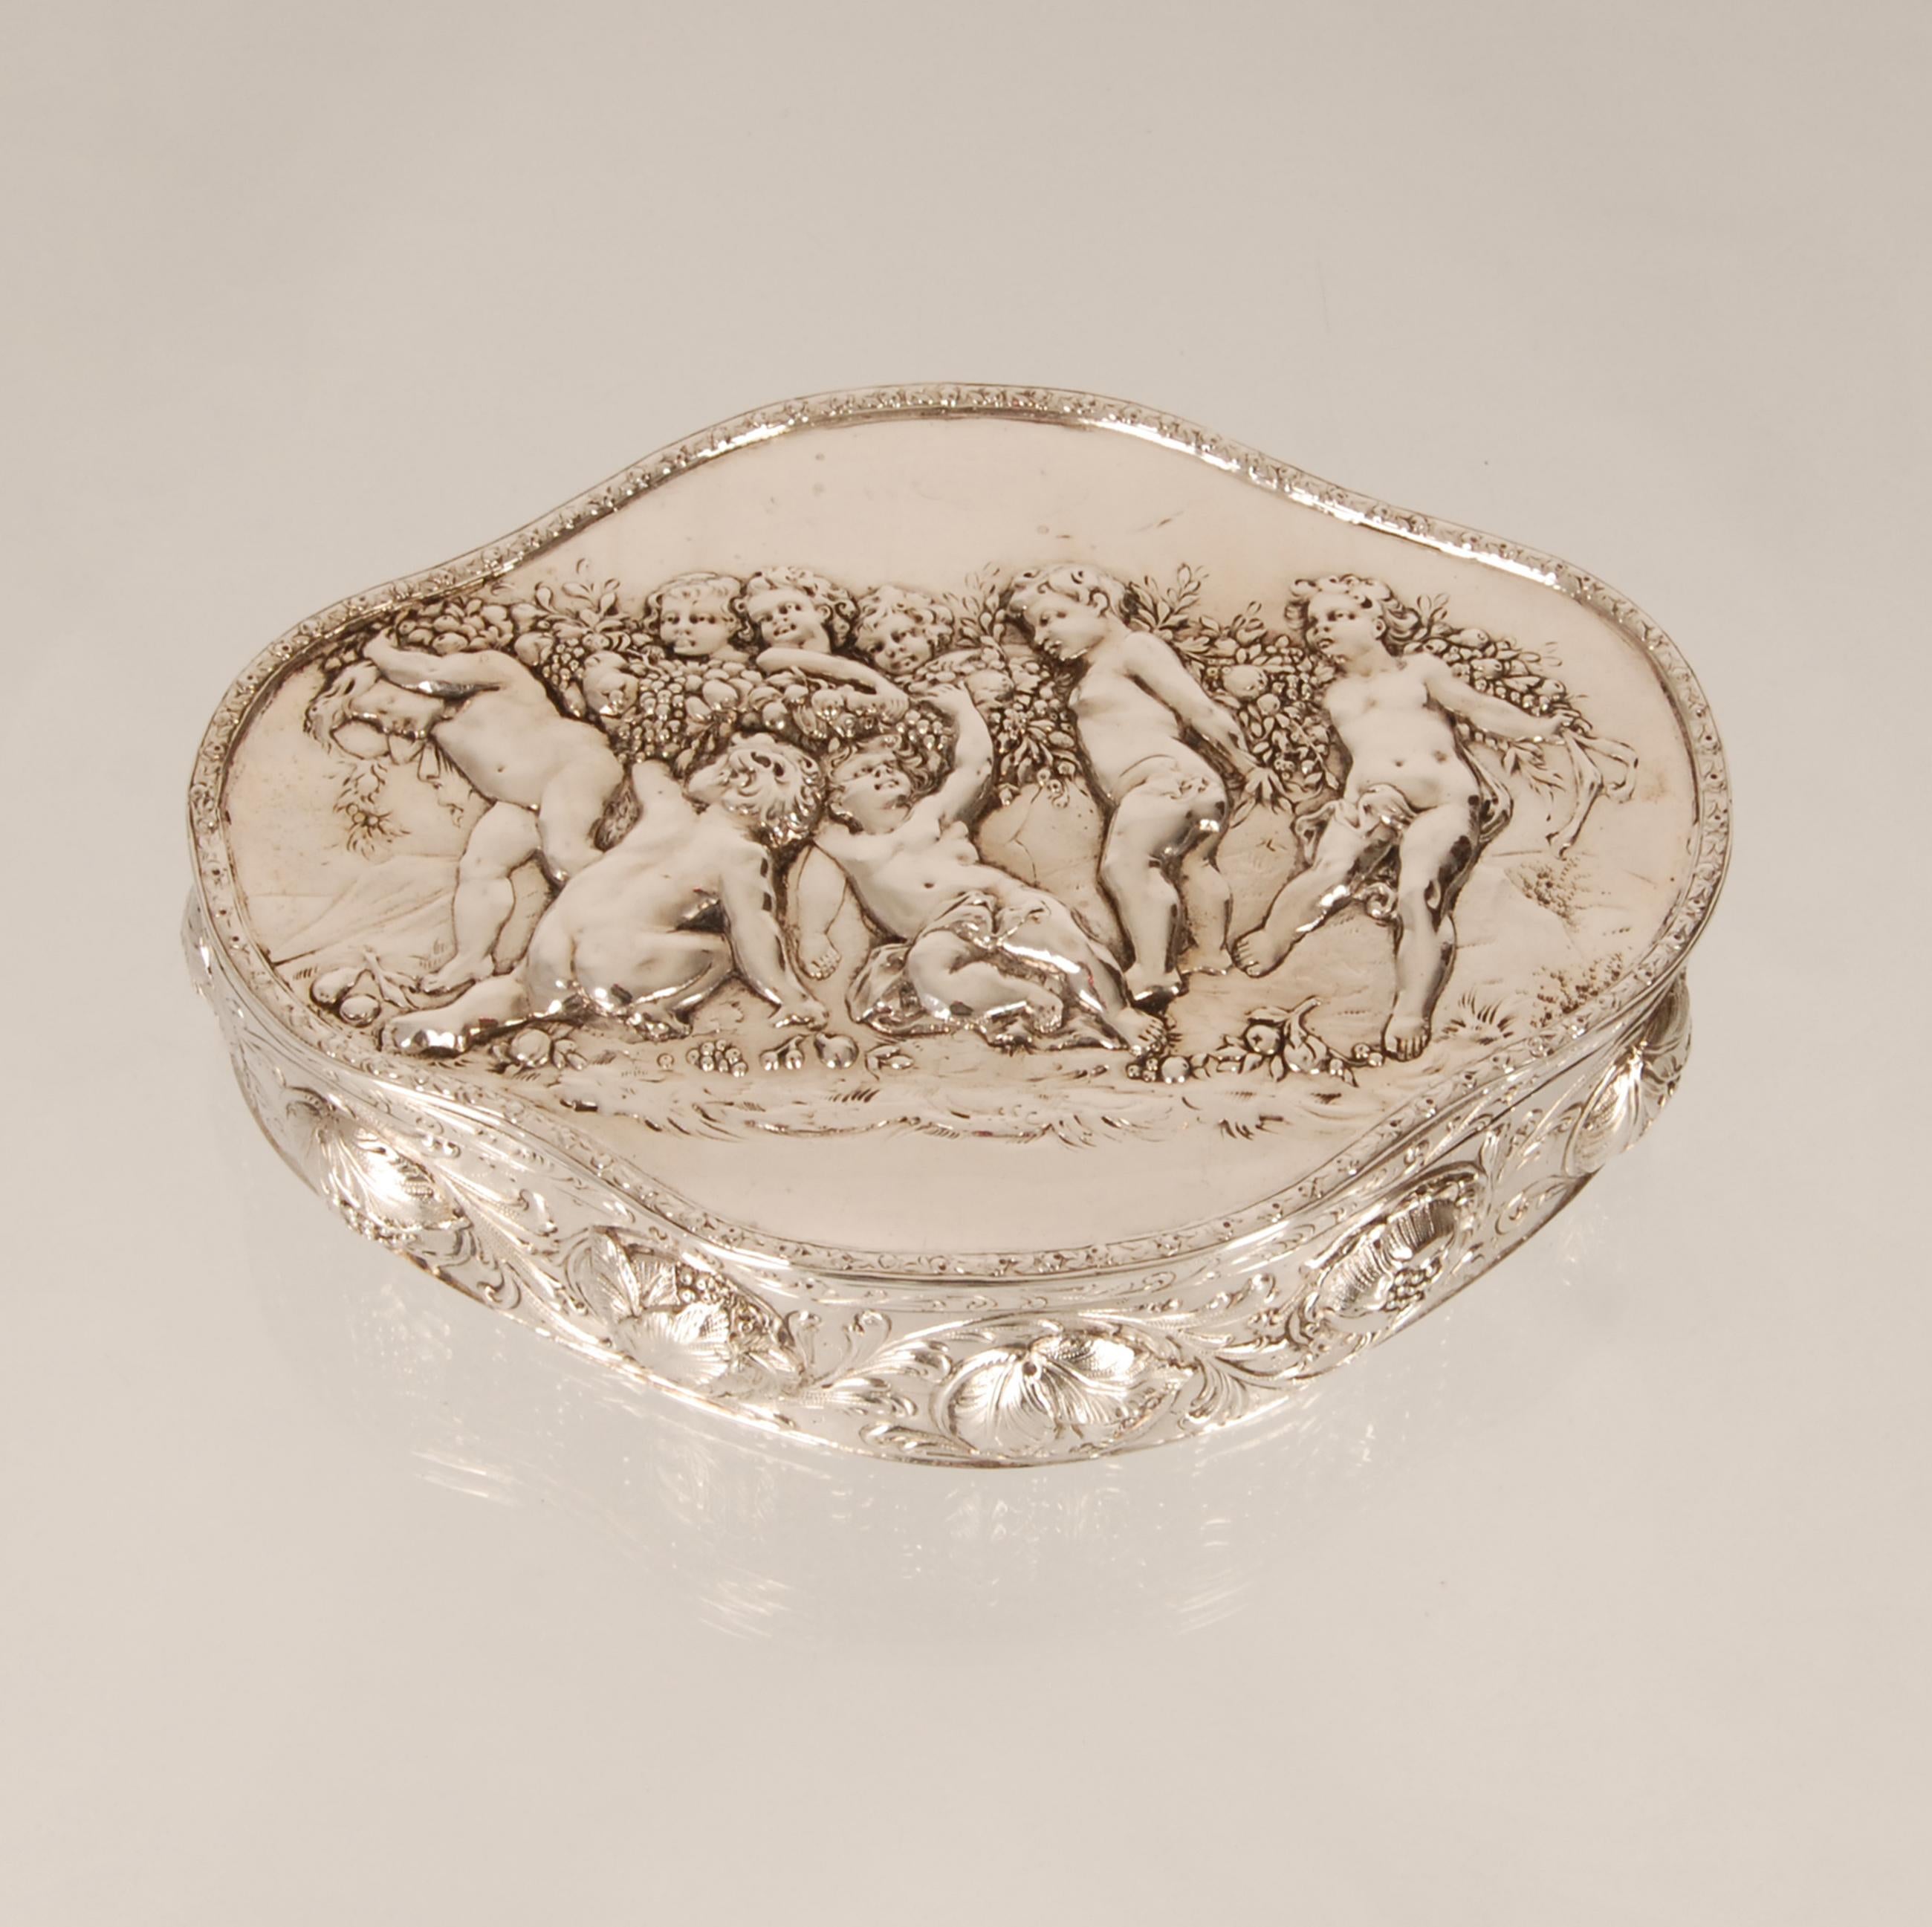 A 19th century Hanau sterling silver presentation box or jewelry box with hinged cover.
Large 800 silver box of quatrefoil form, impressive weight and a richly gilt interior
The cover finely chased with 8 Cherubs carrying a garland from fruits and